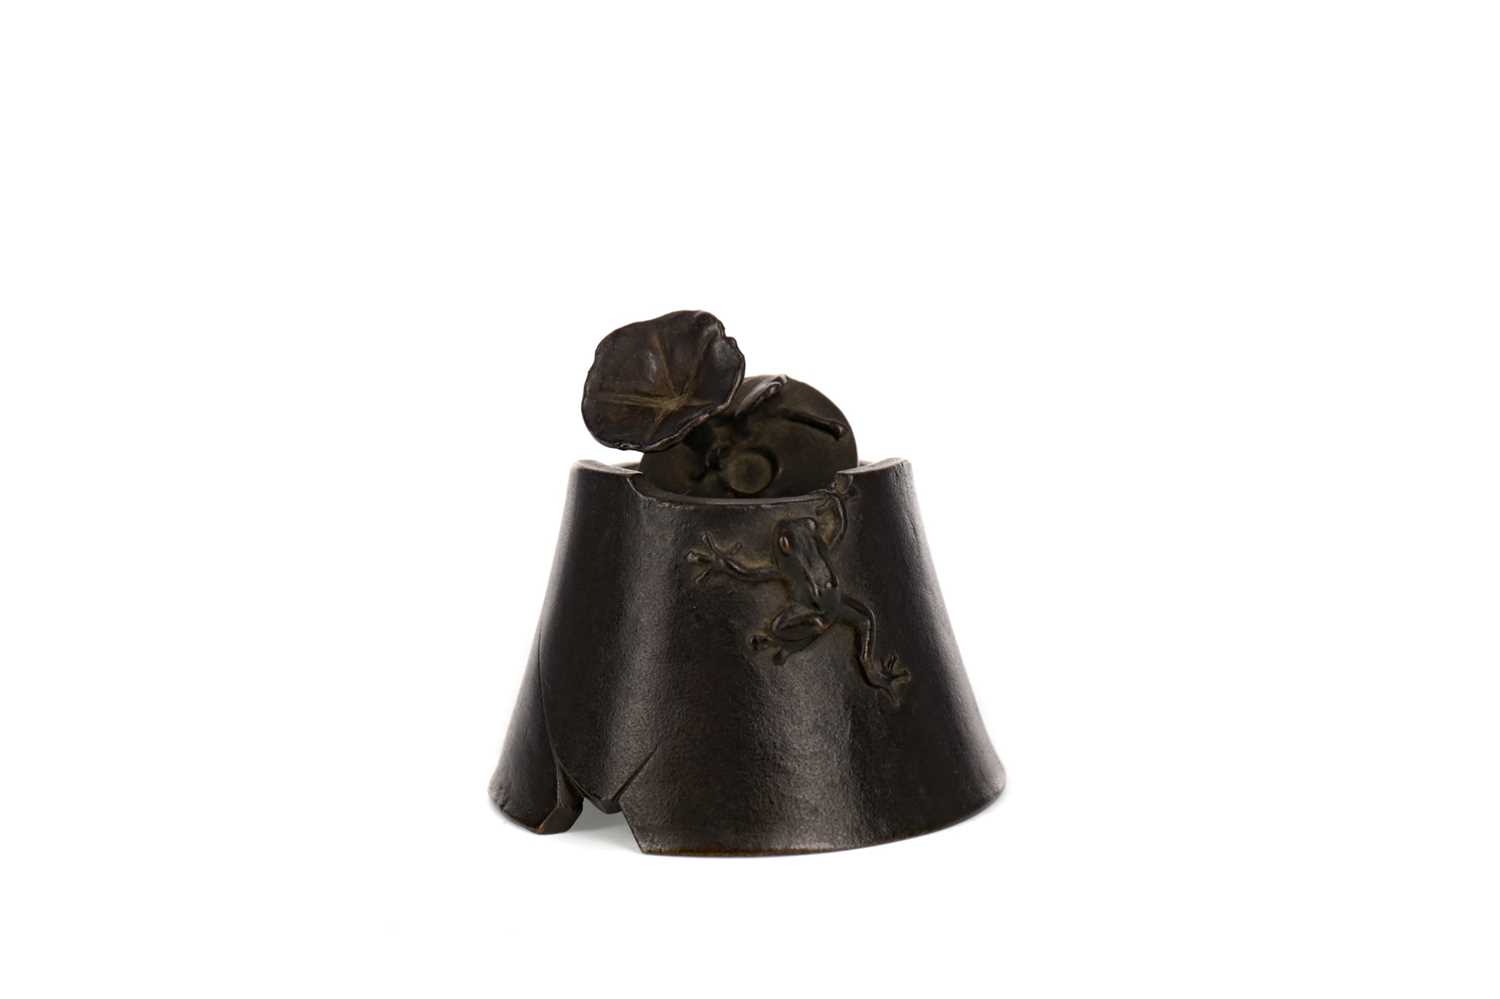 Lot 985 - AN EARLY 20TH CENTURY JAPANESE BRONZE INKWELL